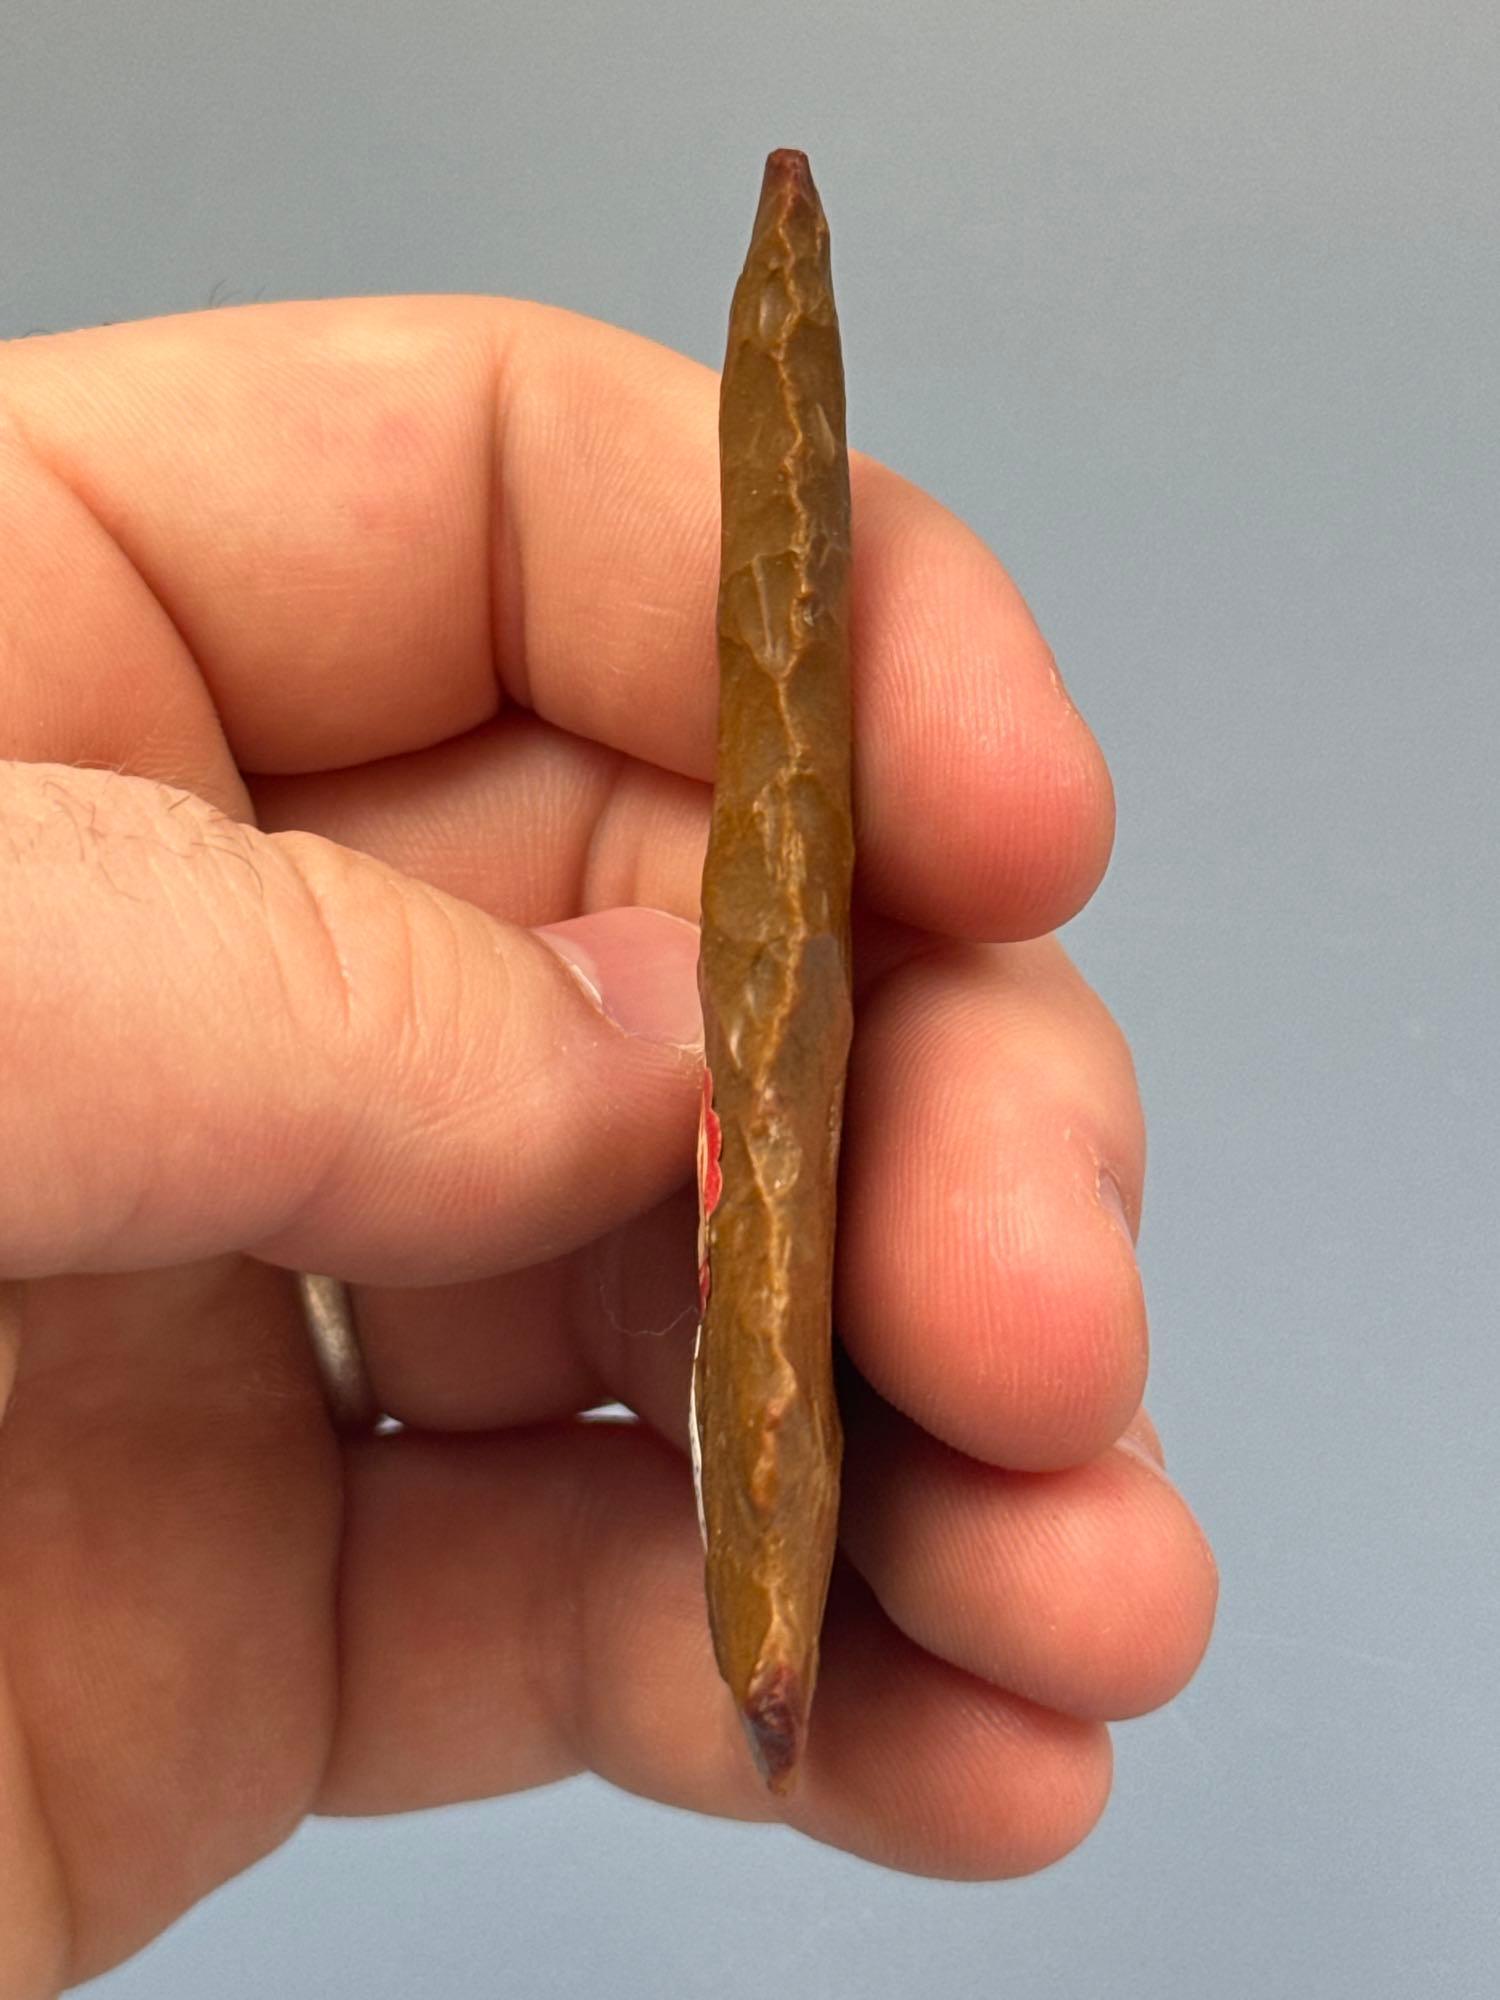 STUNNING 3 1/8" Jasper Meadowood, Anciently Resharpened, Found in Lehigh Co., PA, Heat Treated Tip a